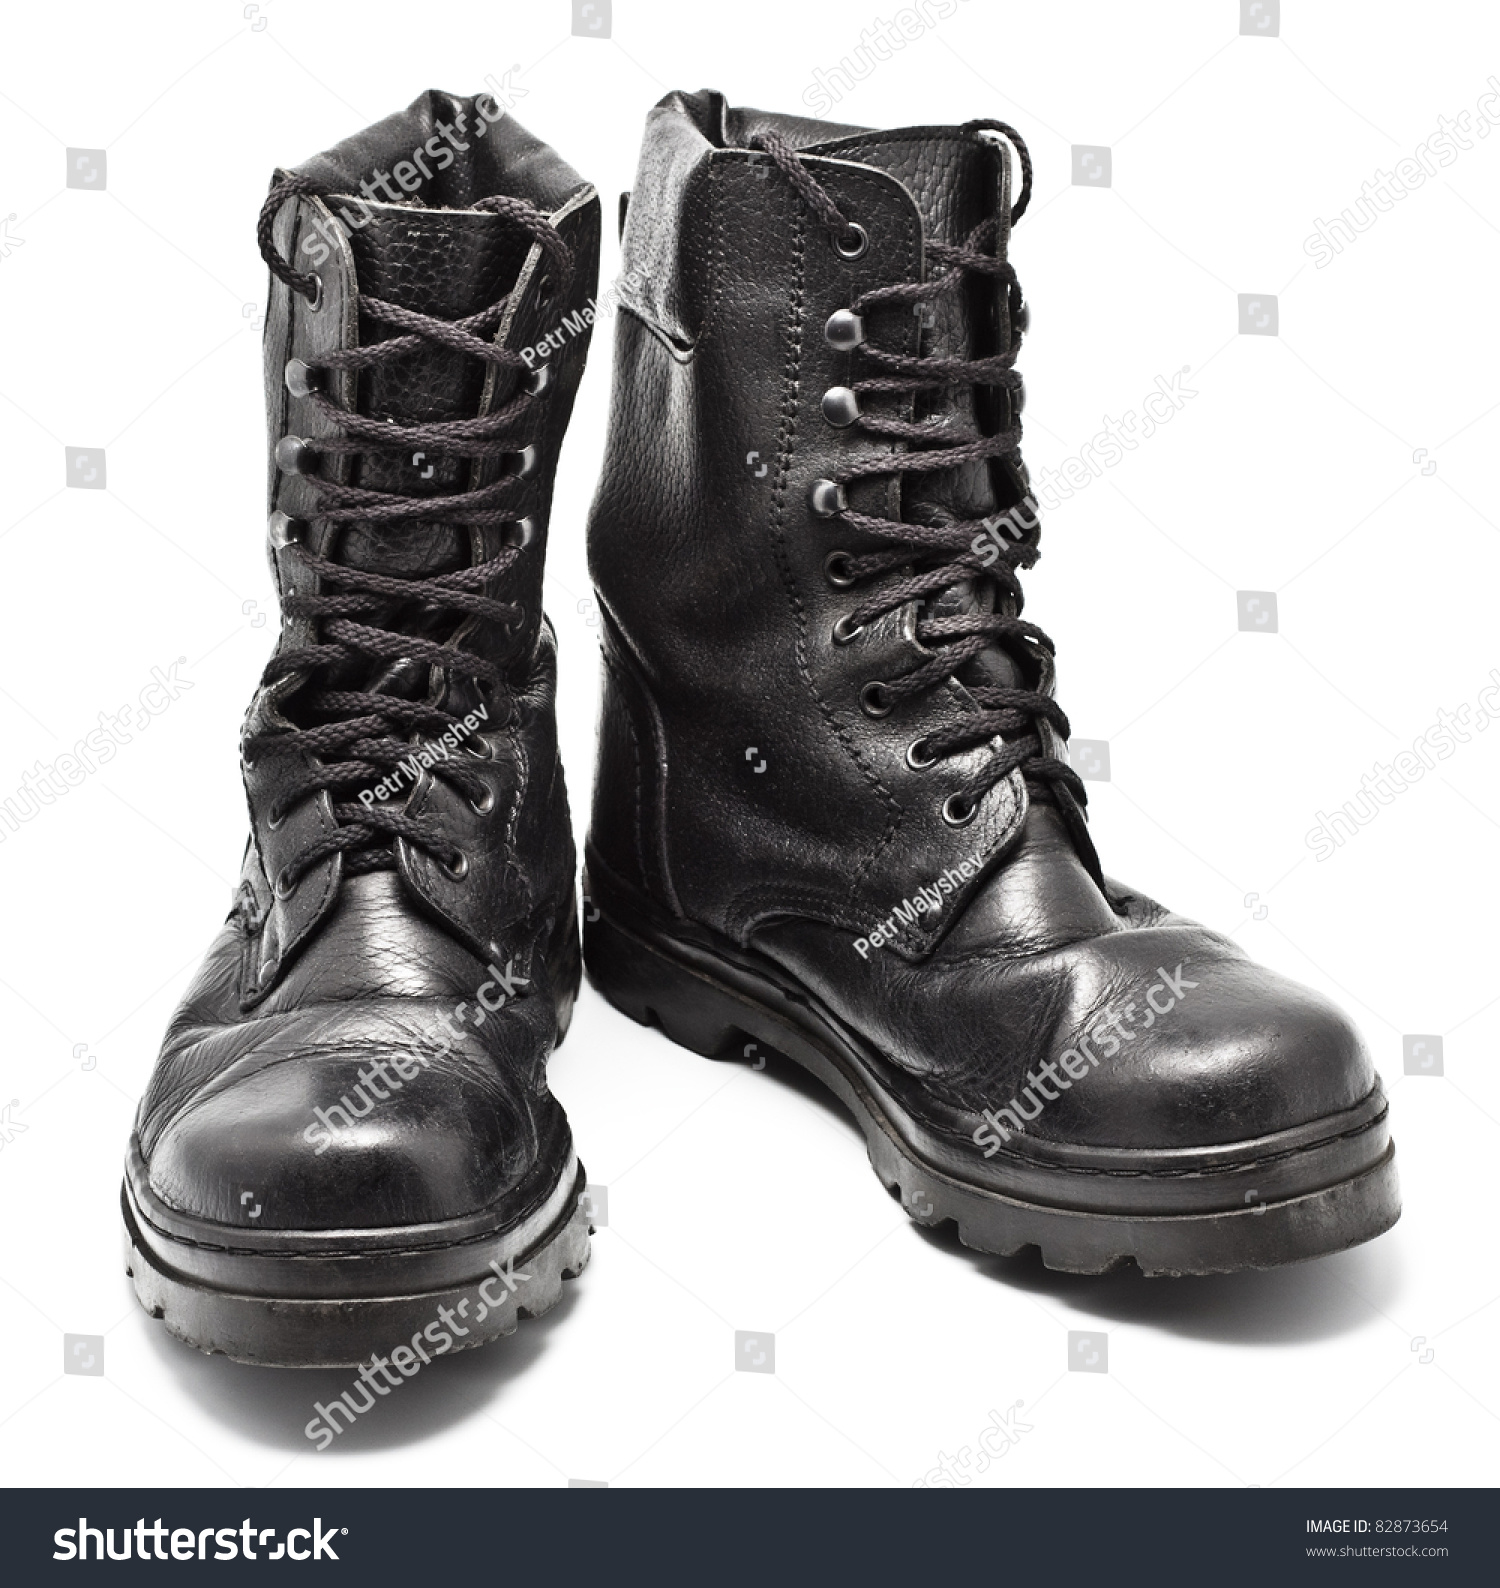 Black Leather Army Boots Stock Photo 82873654 : Shutterstock